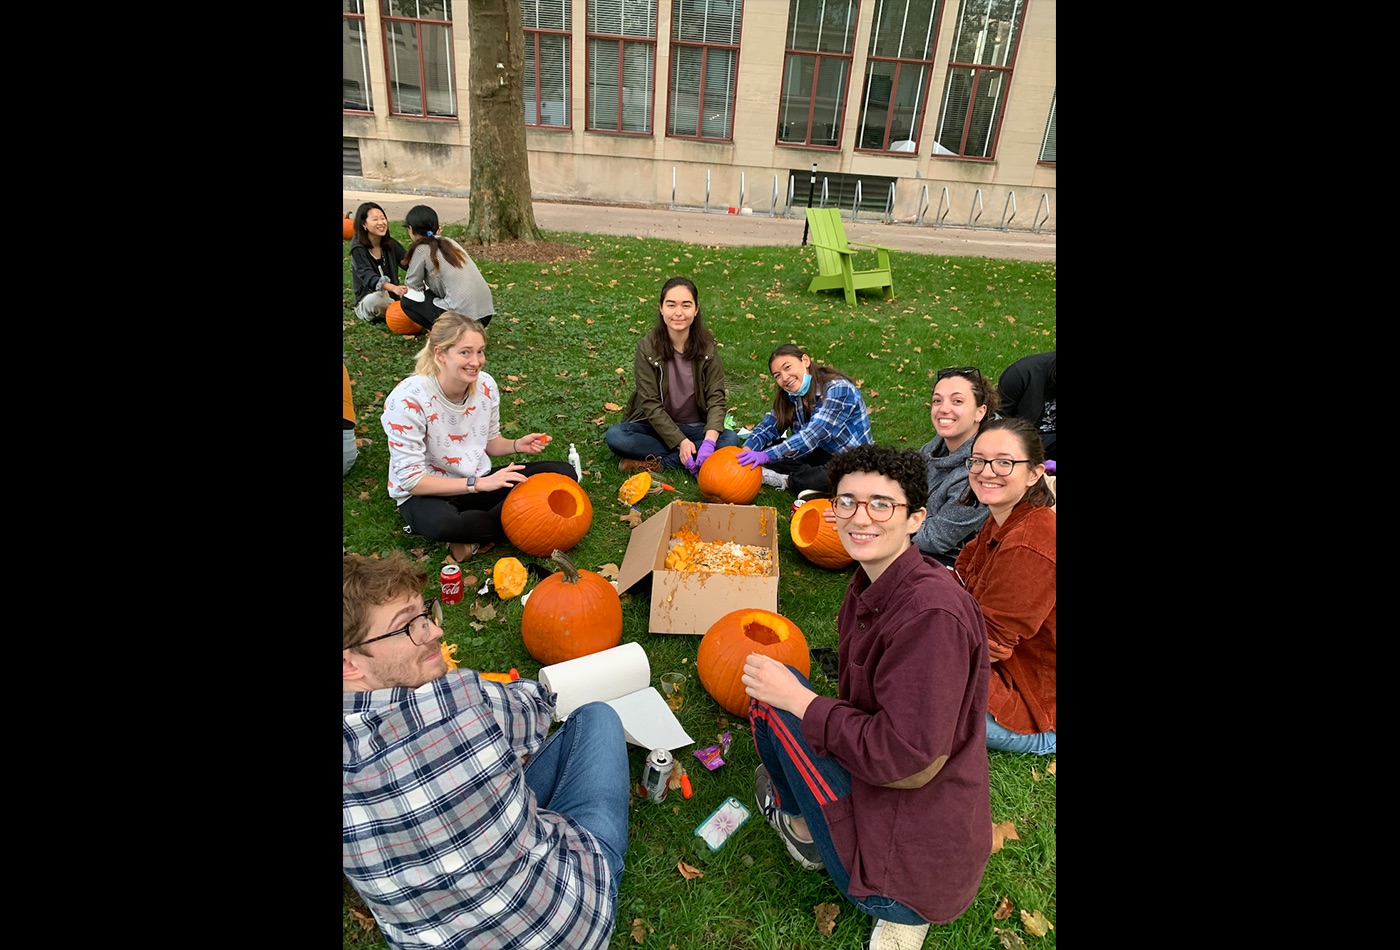 A group of students carve pumpkins on the grass.